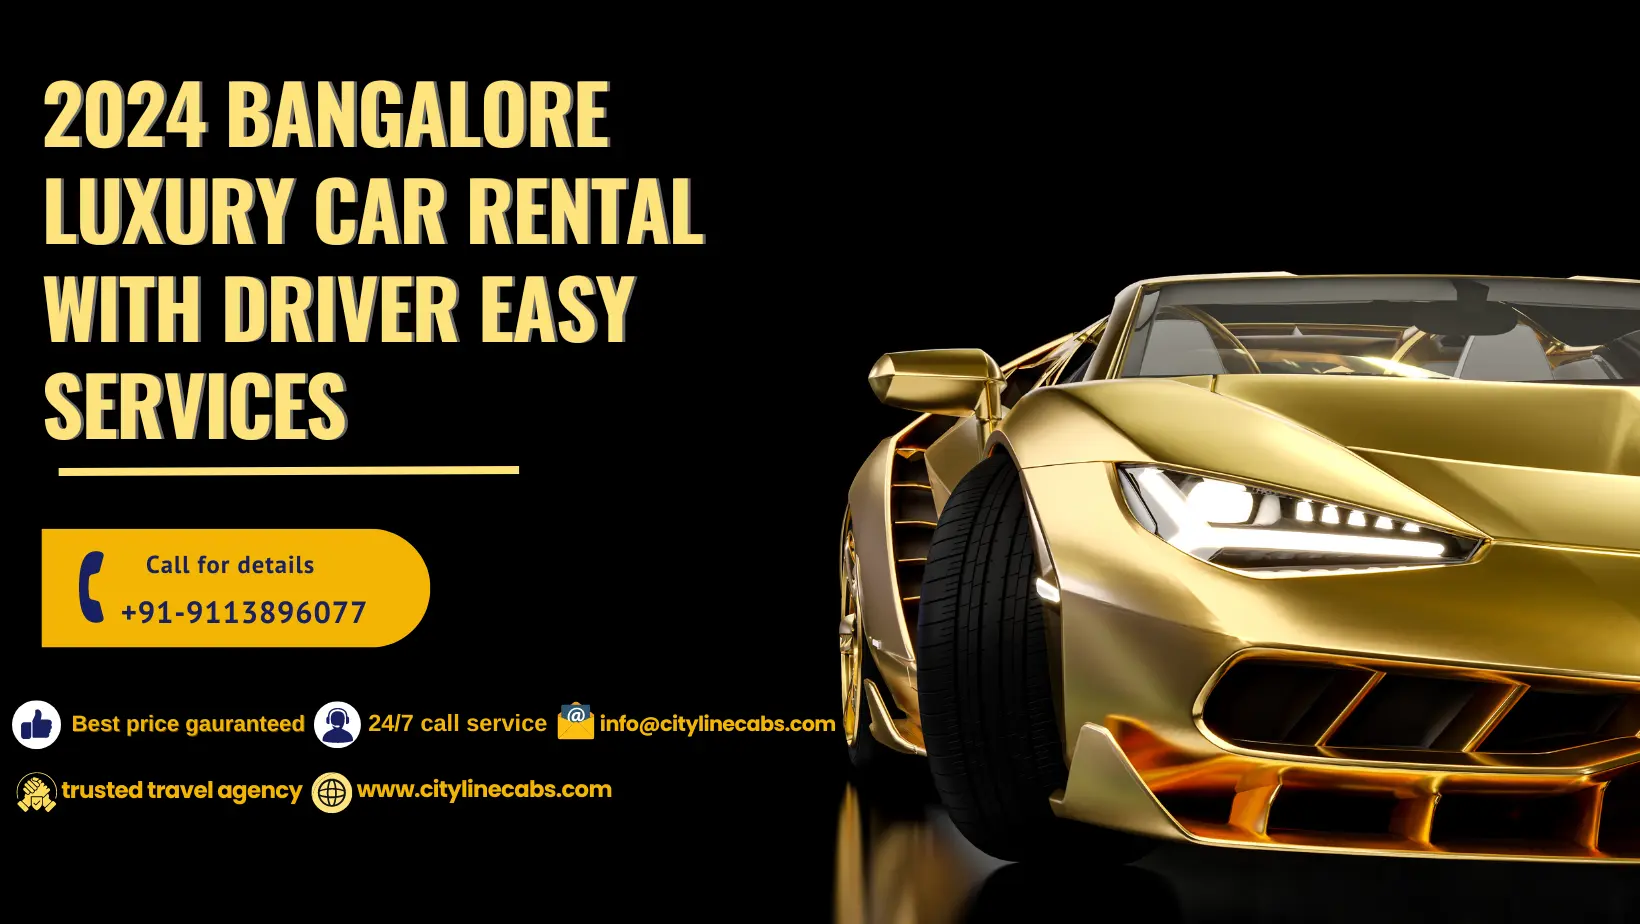 2024 Bangalore Luxury Car Rental With Driver Easy Services